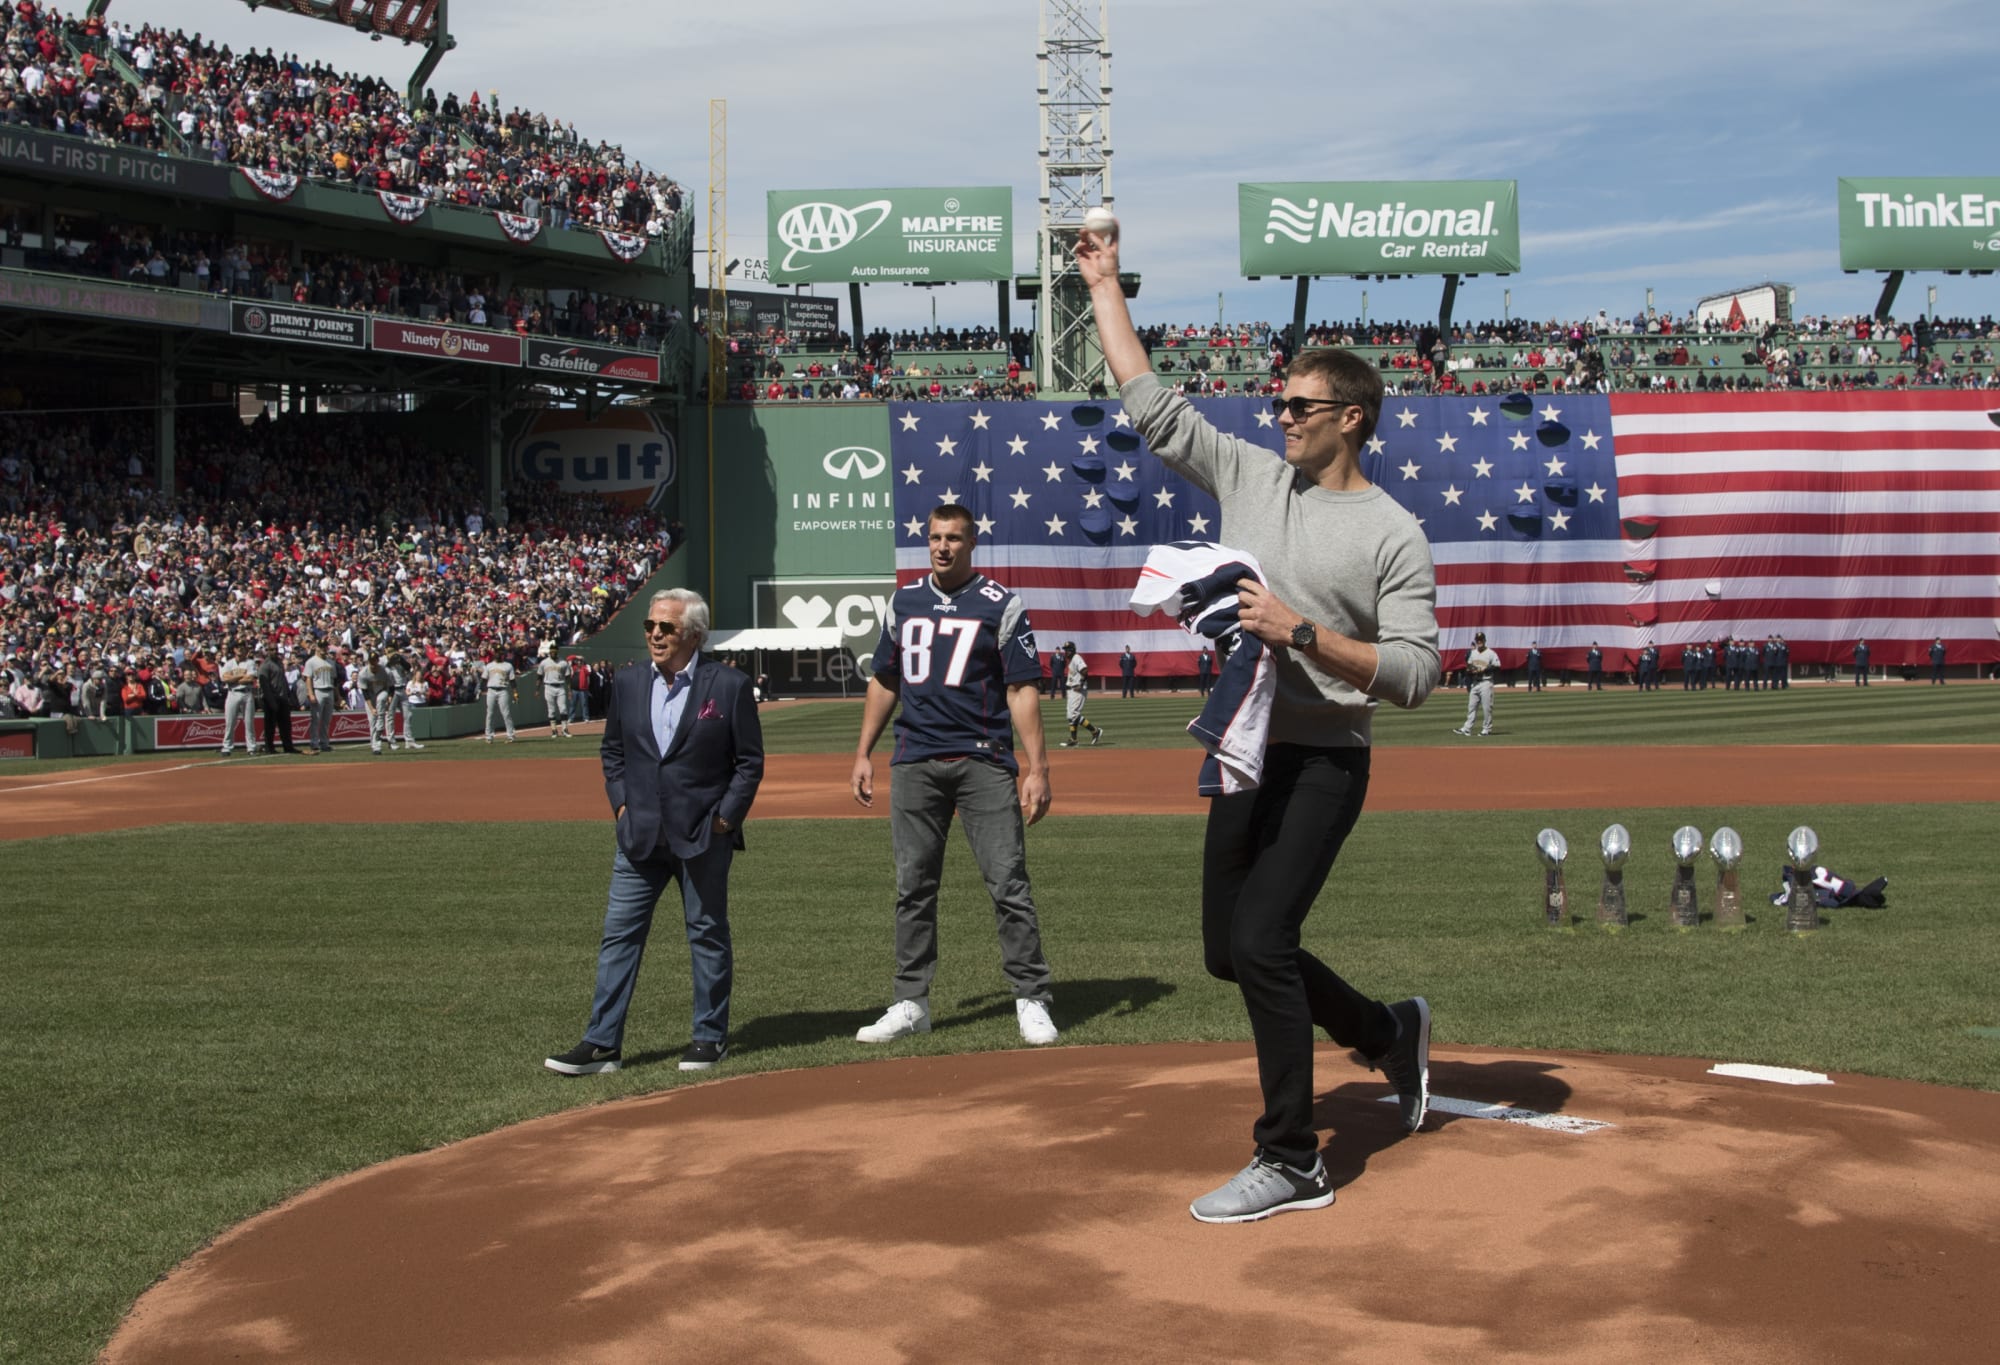 Boston Red Sox: what did the team look like before Tom Brady